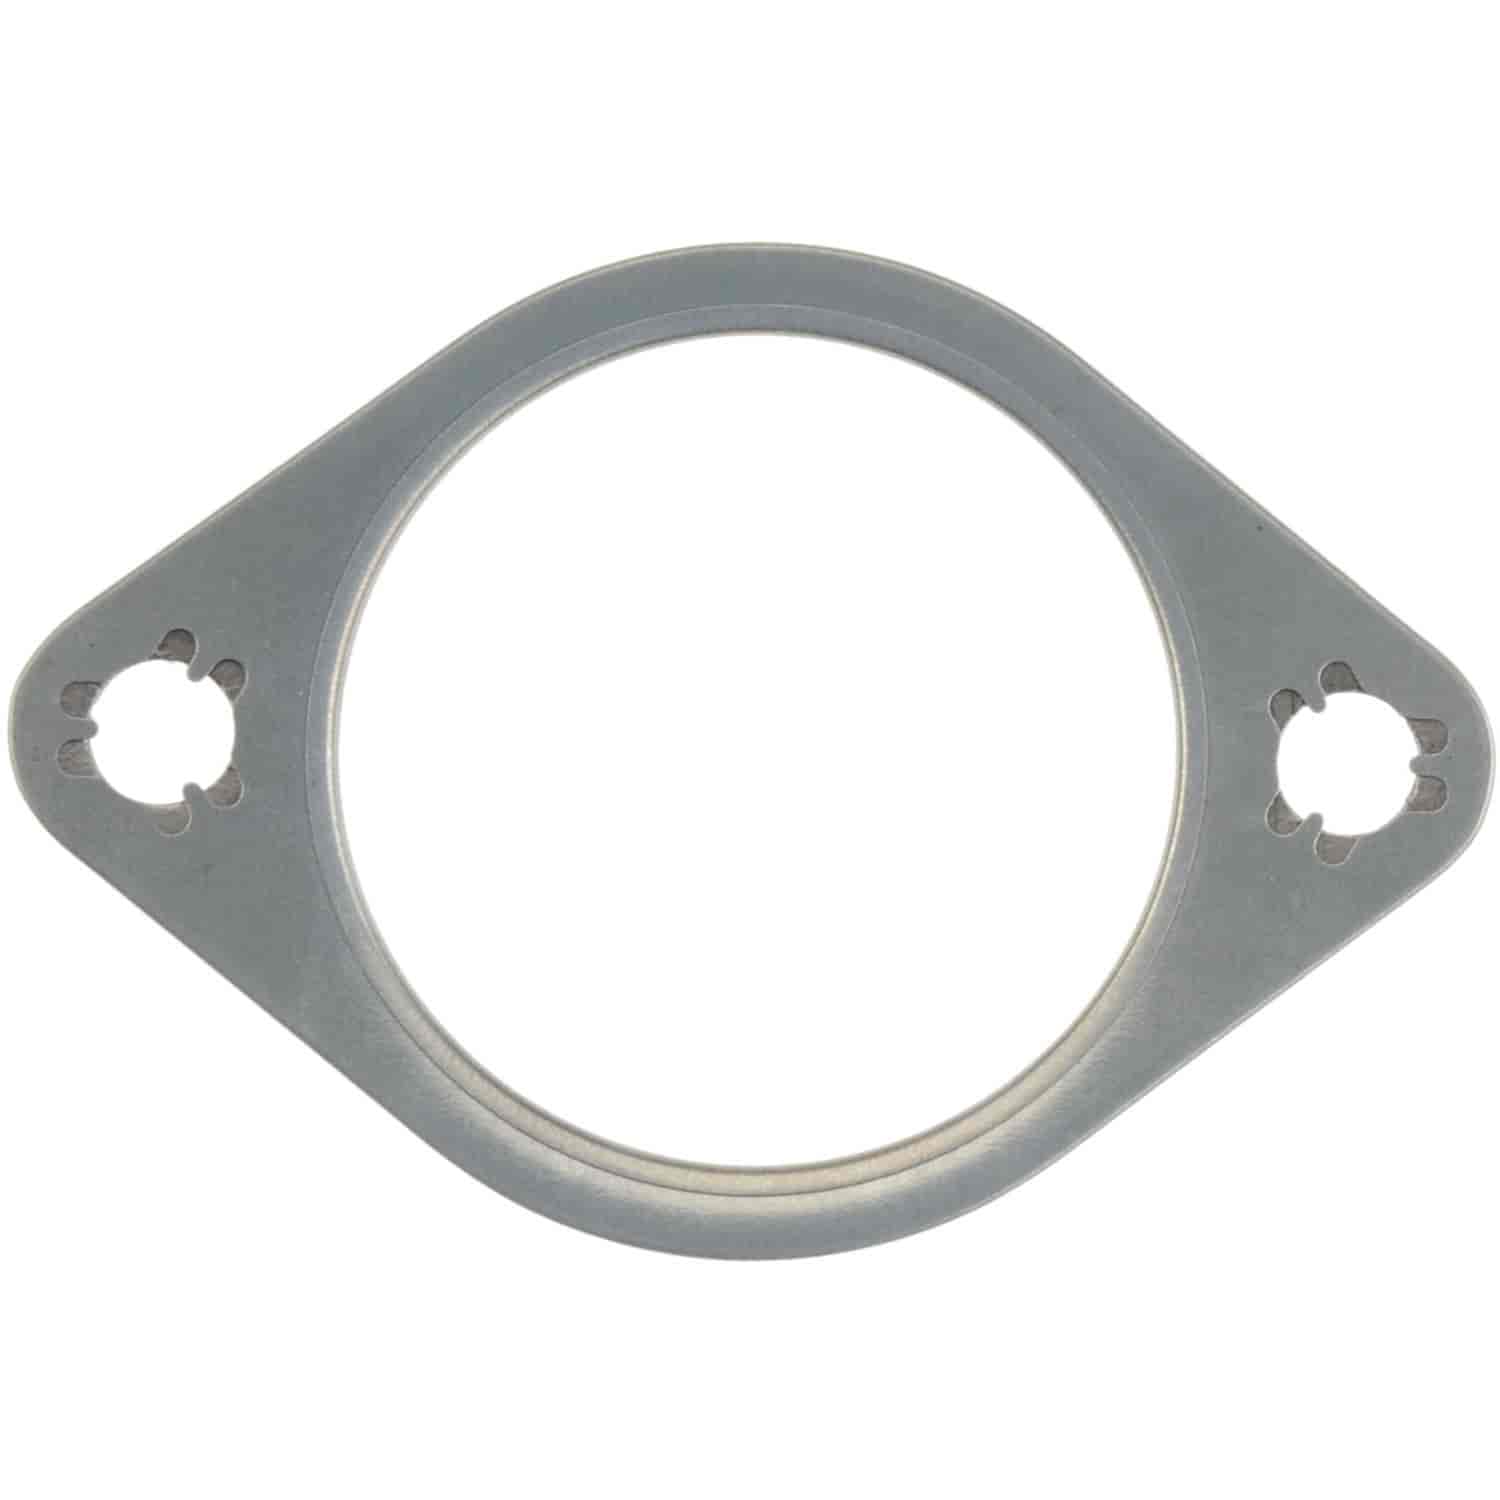 Exhaust Pipe Gasket FORD-TRUCK 6.4L OHV POWERSTROKE 2008-2010 EXHAUST PIPE TO EGR CATALYST